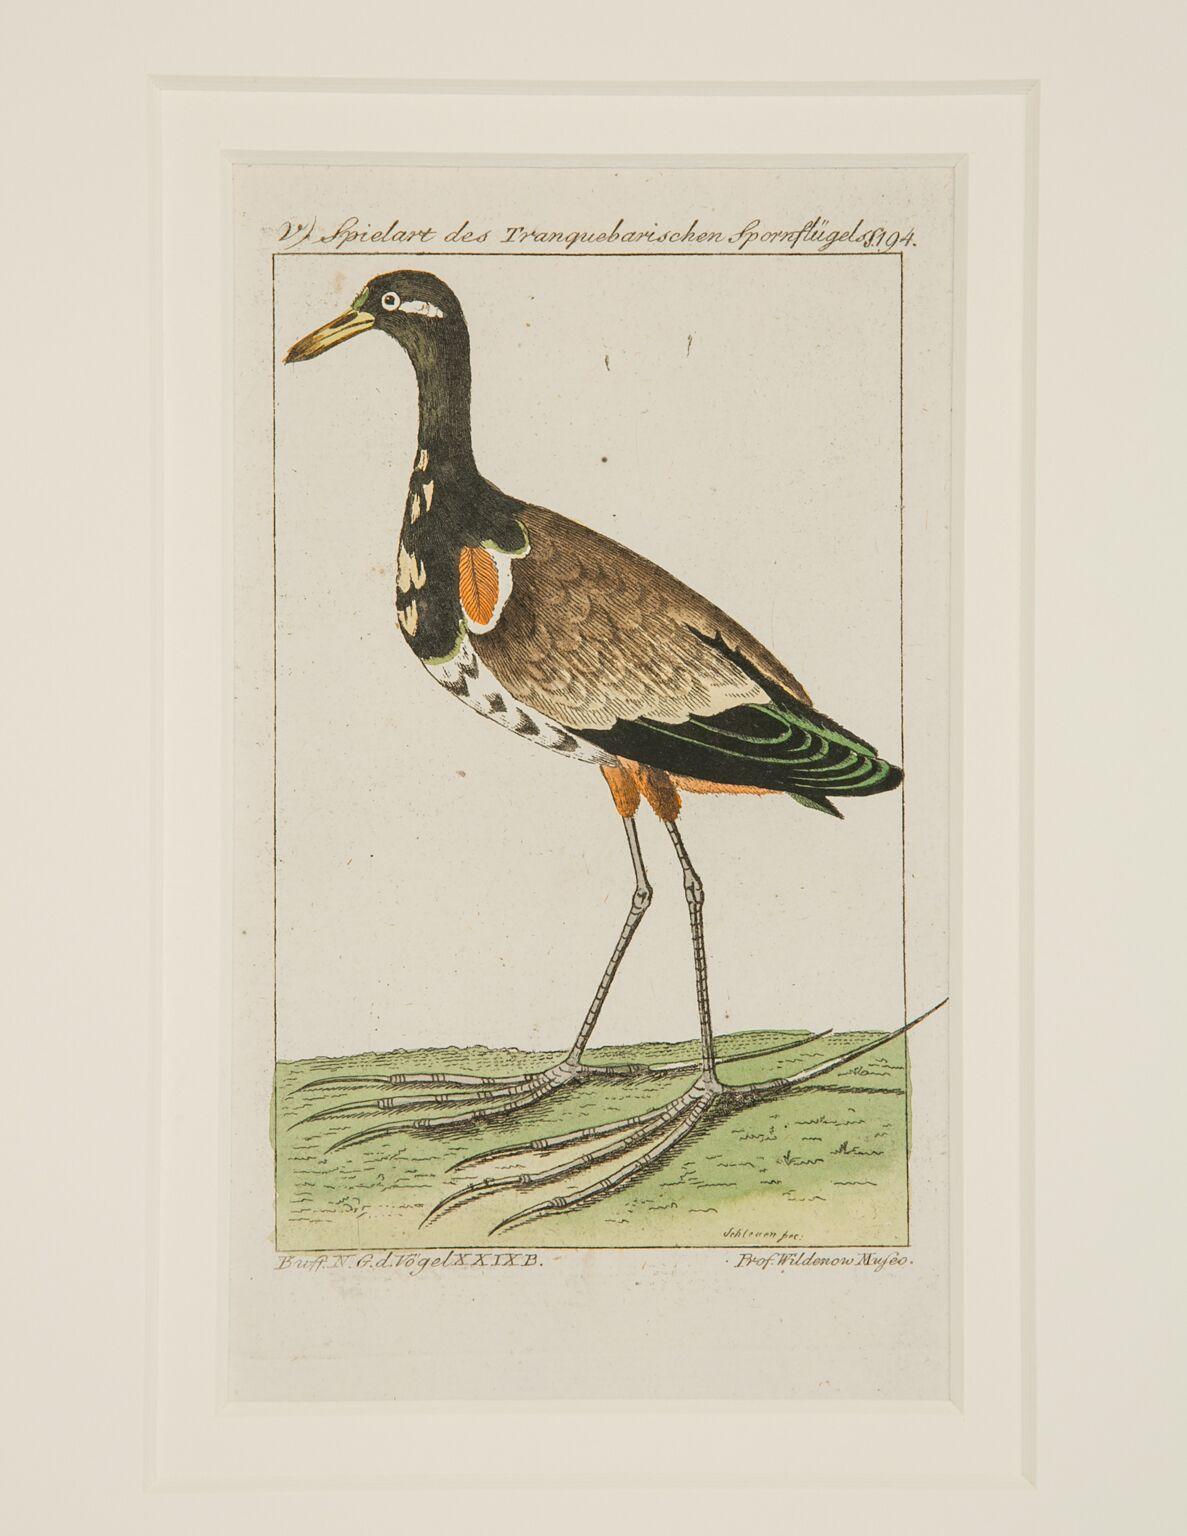 Hand-Colored Bird Engravings French 18th Century by Francois-Nicolas Martinet 1